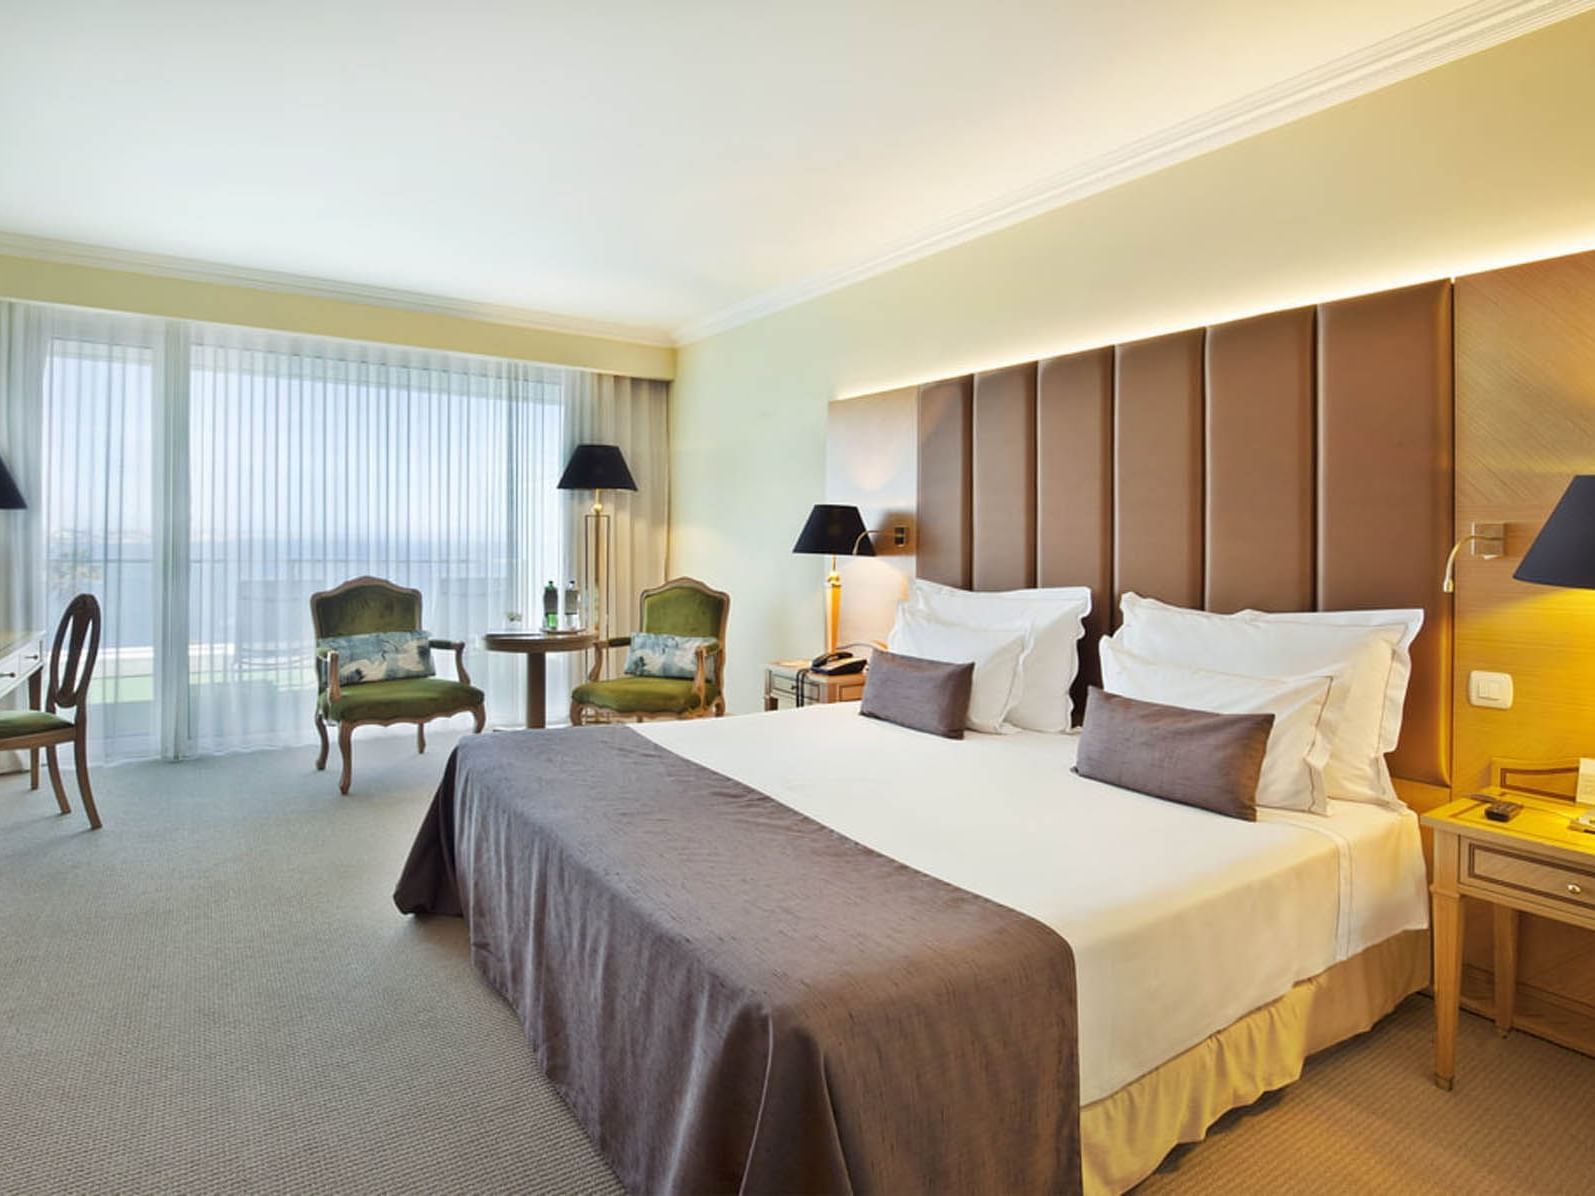 Luxury king sized bed in Premium Room at Hotel Cascais Miragem 